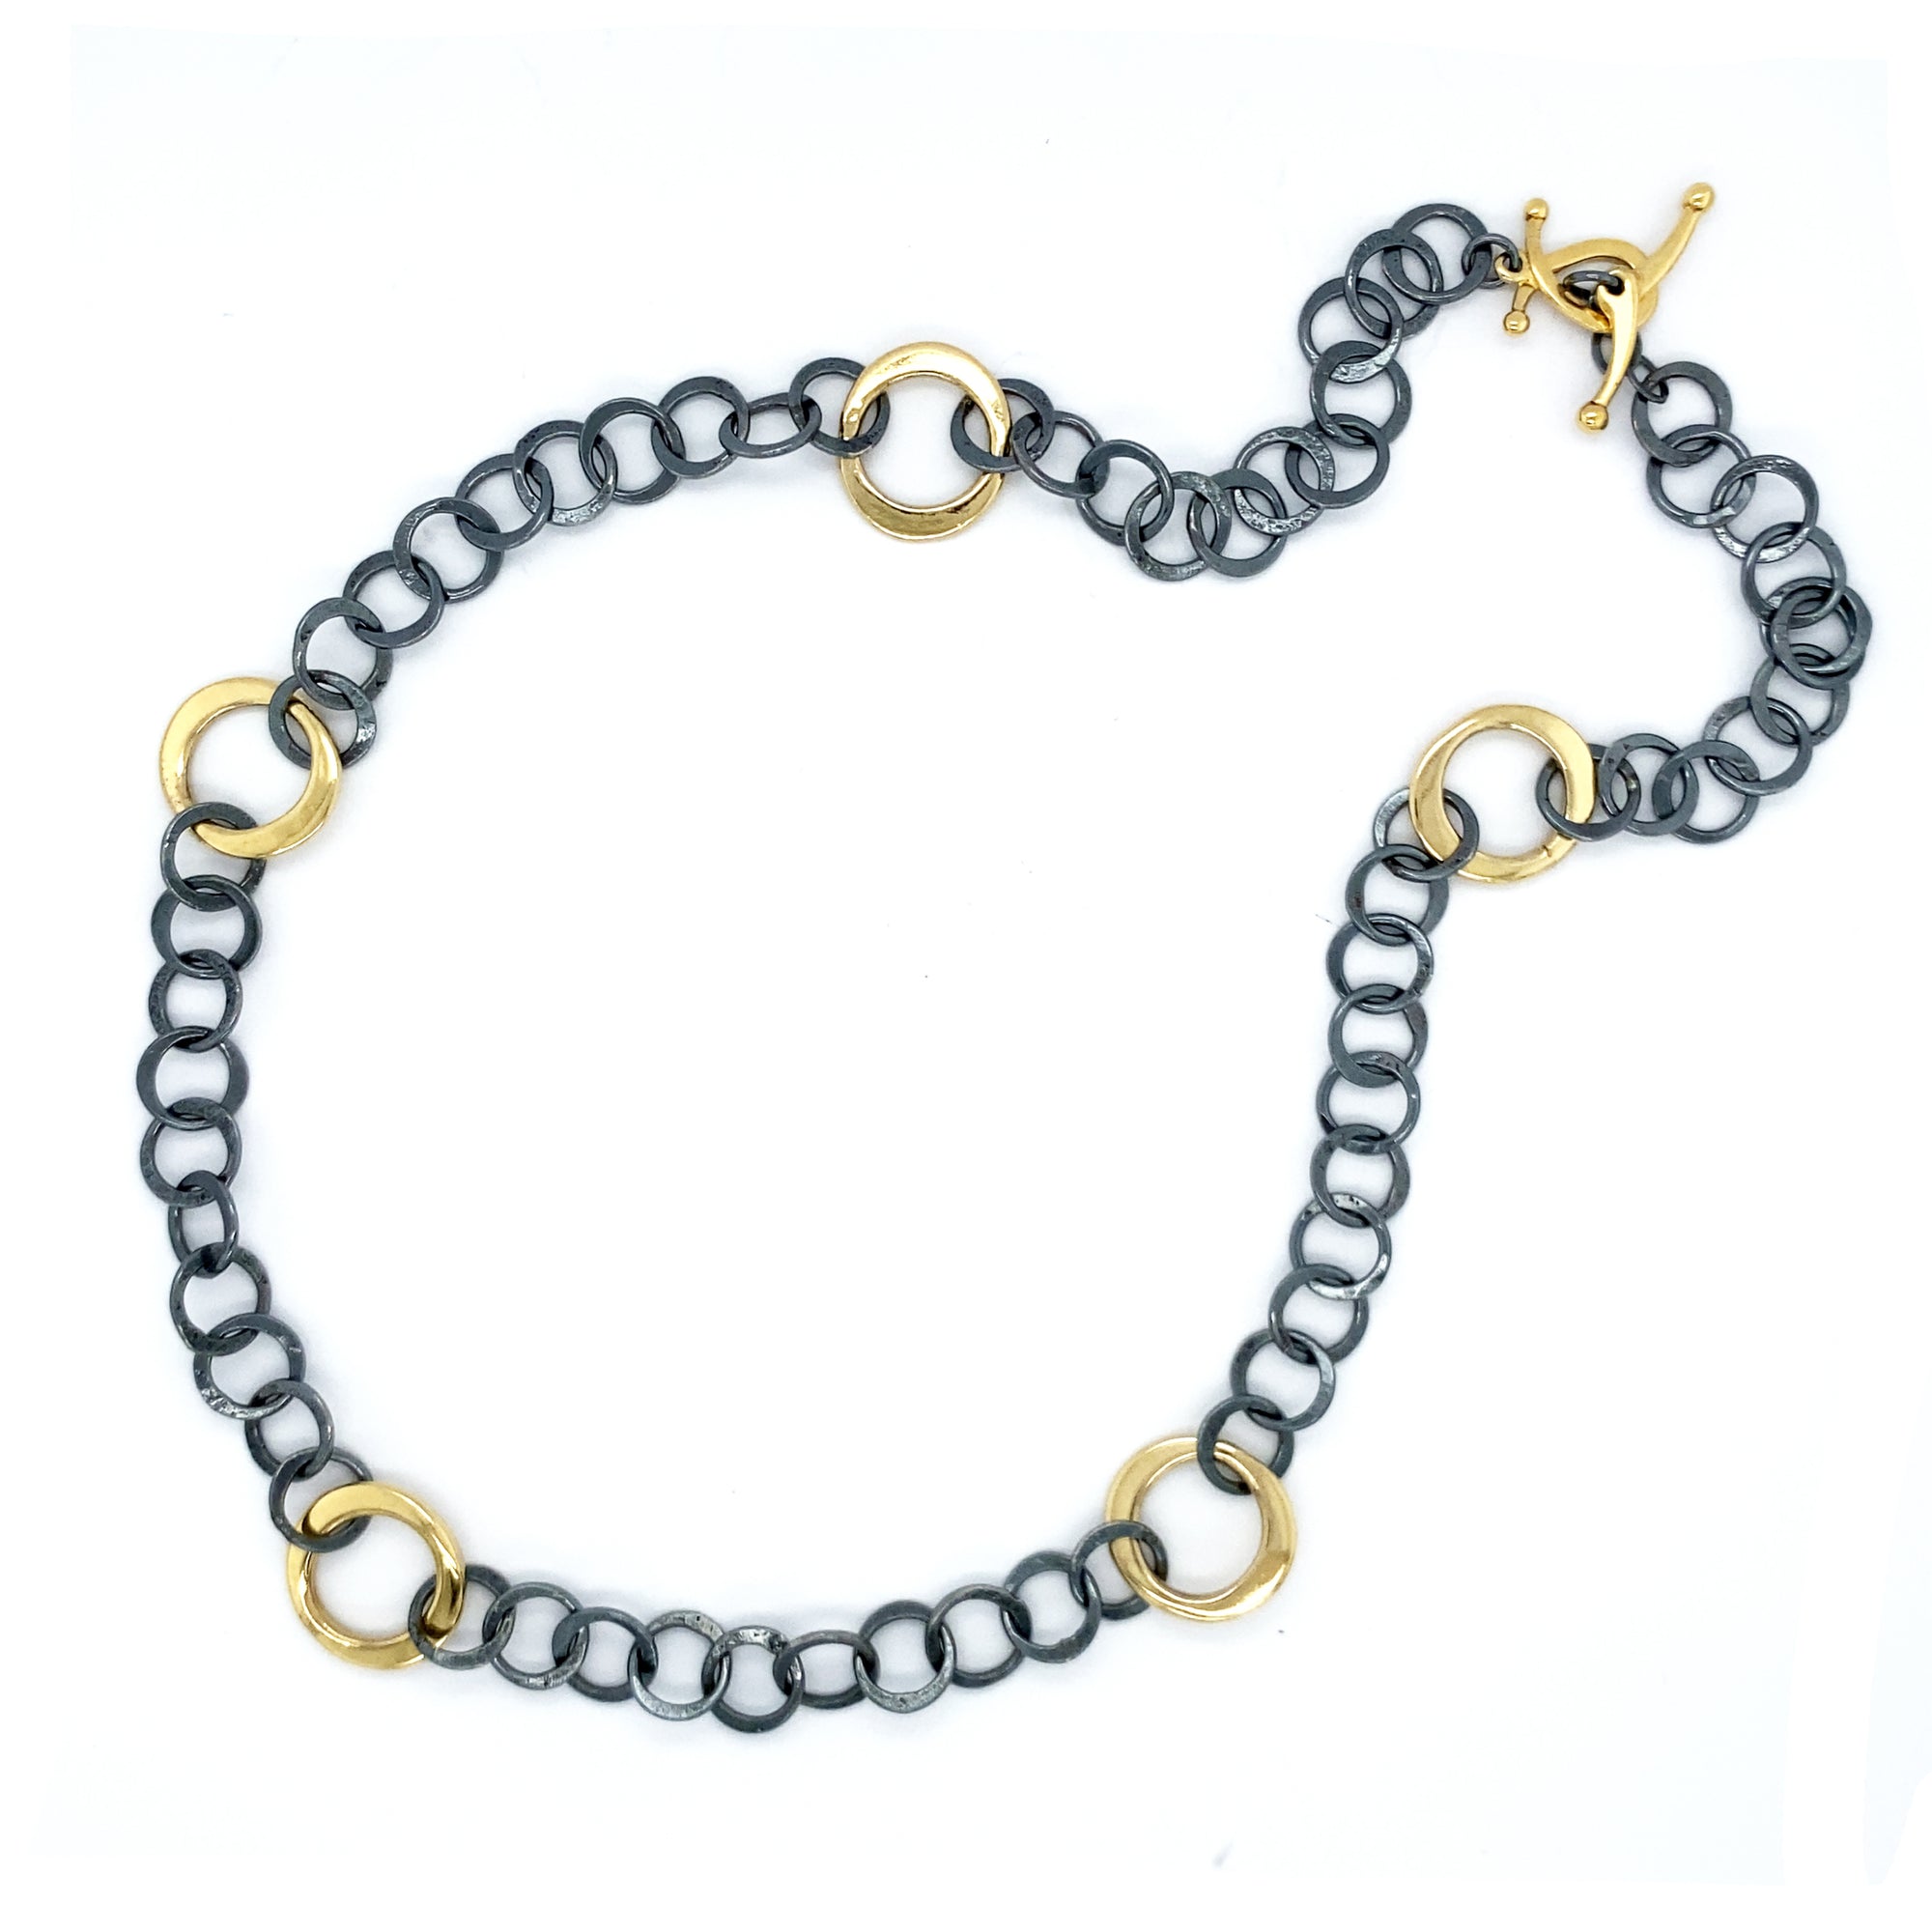 Handmade Chain - Black and Gold Large